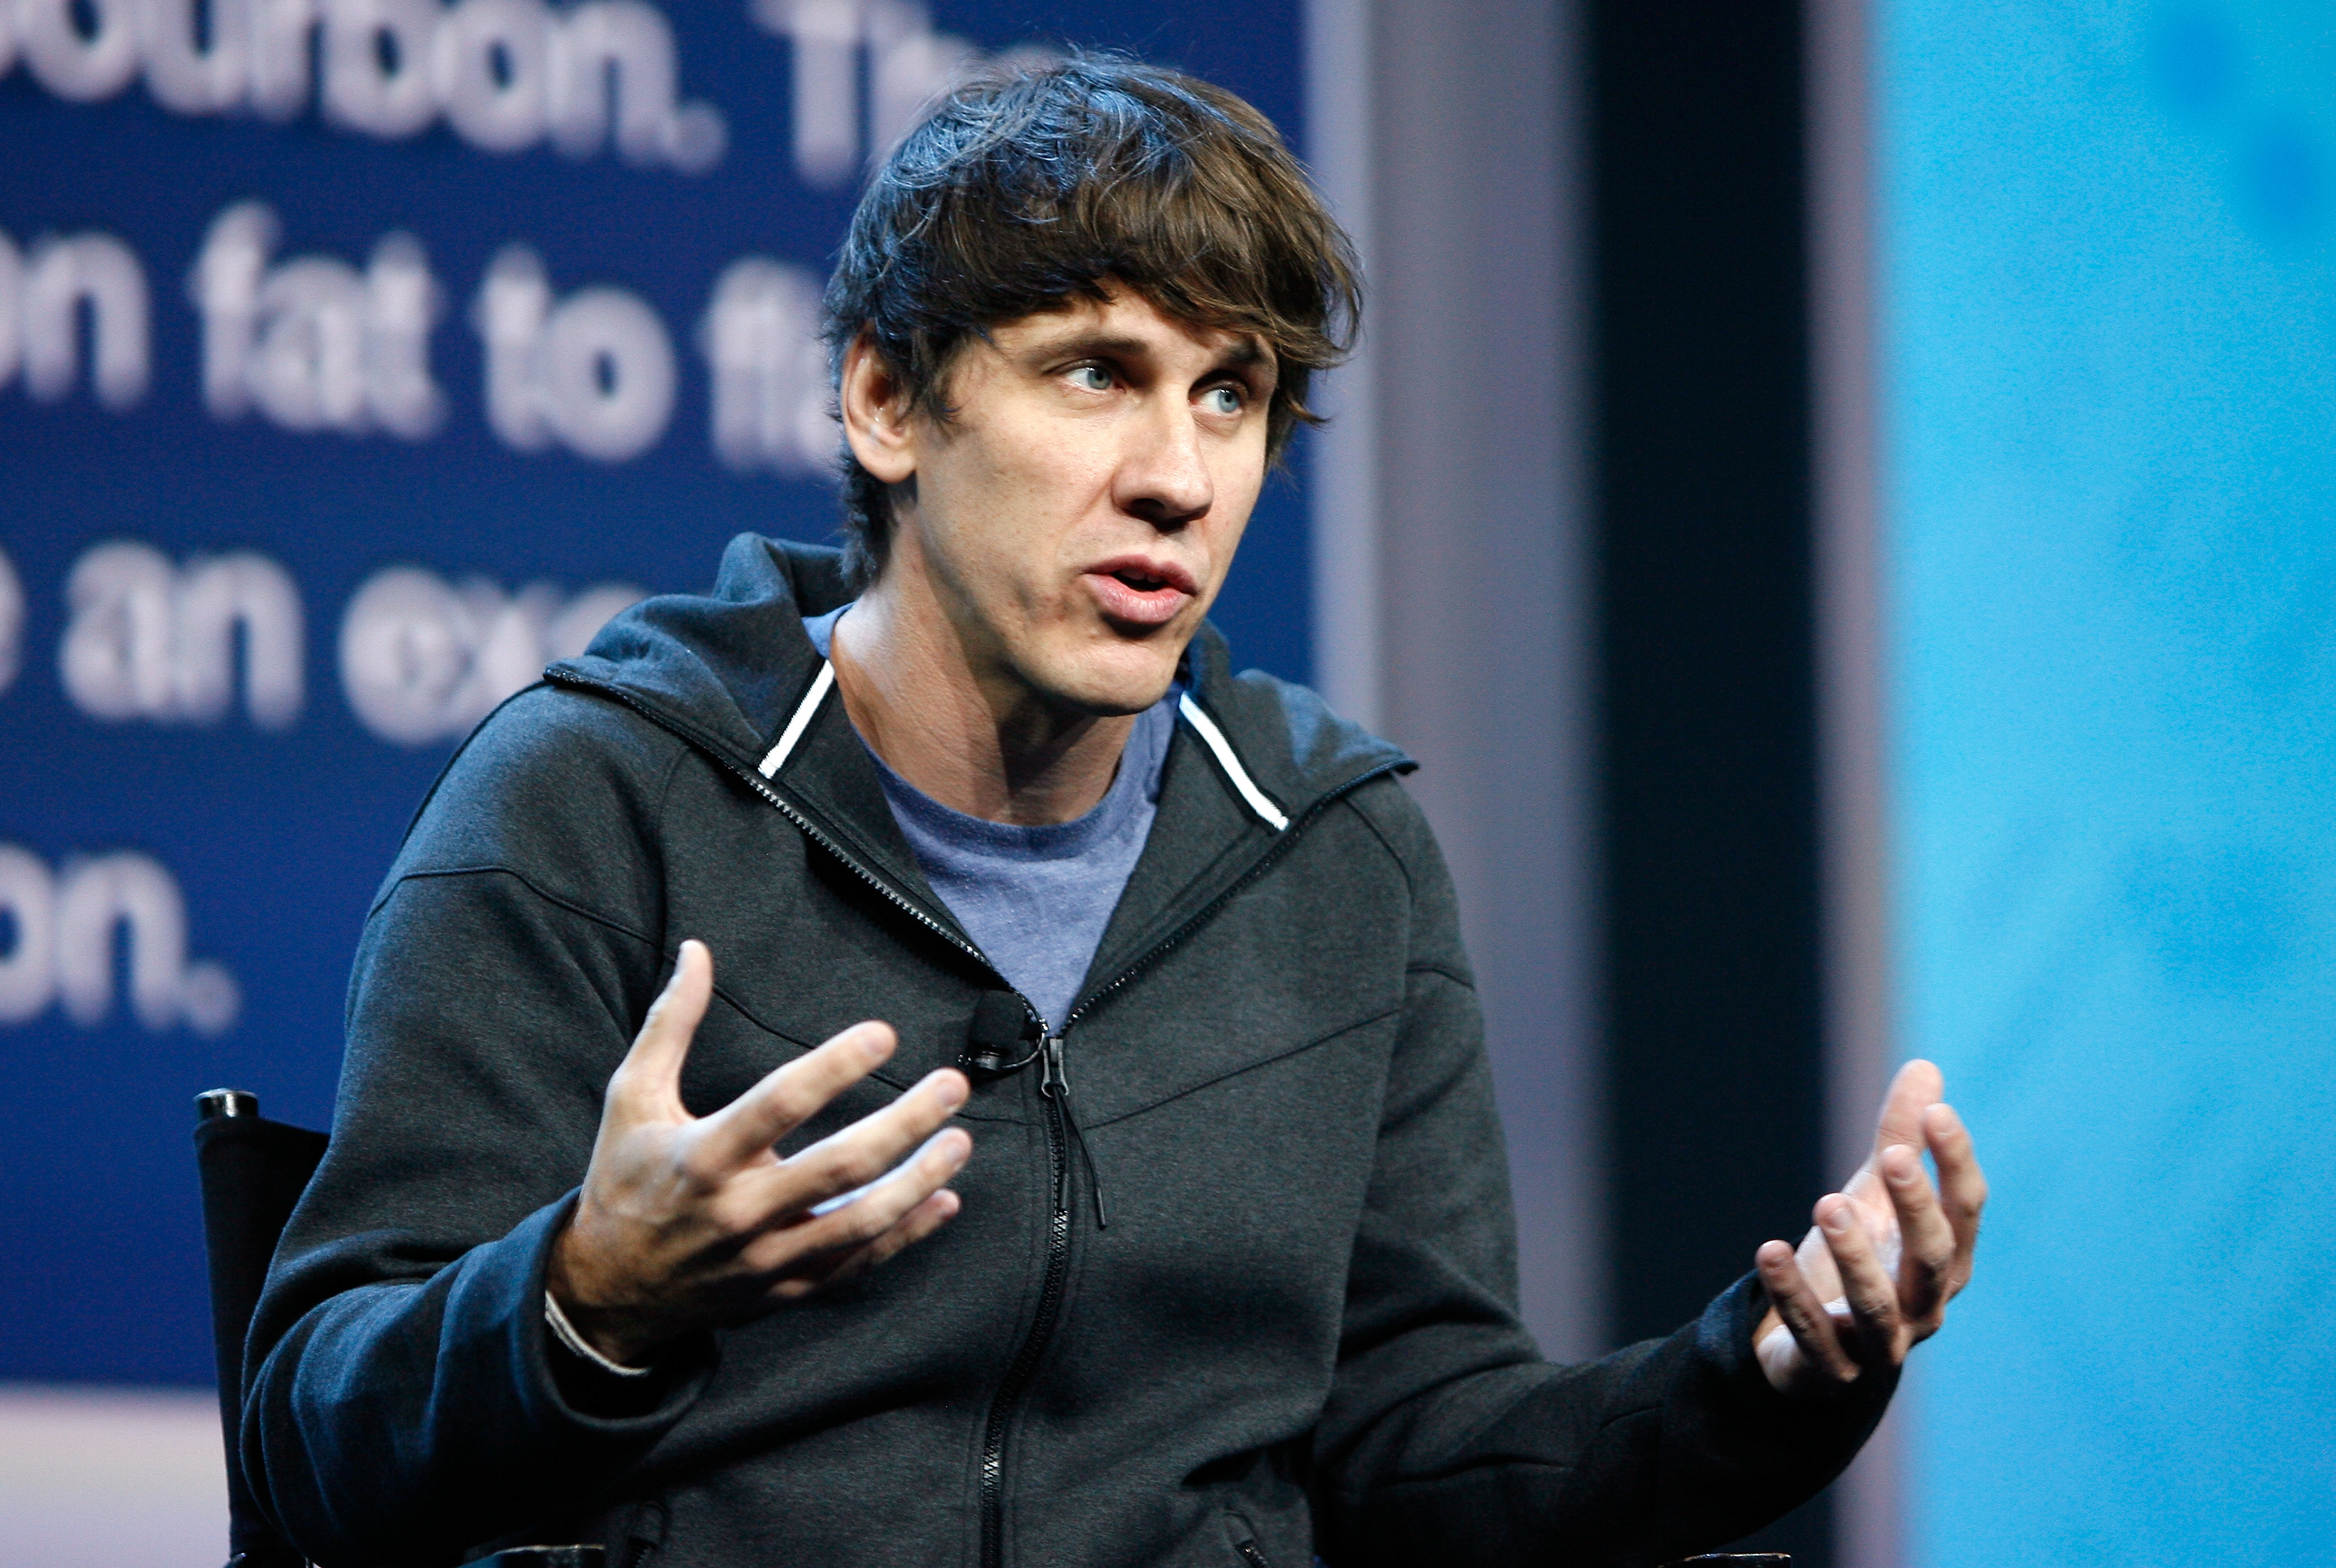 Foursquare co-founder Dennis Crowley speaks during the NikeFuel Forum at Spring Studios on October 15, 2013 in New York City. (Mike Lawrie&mdash;Getty Images)